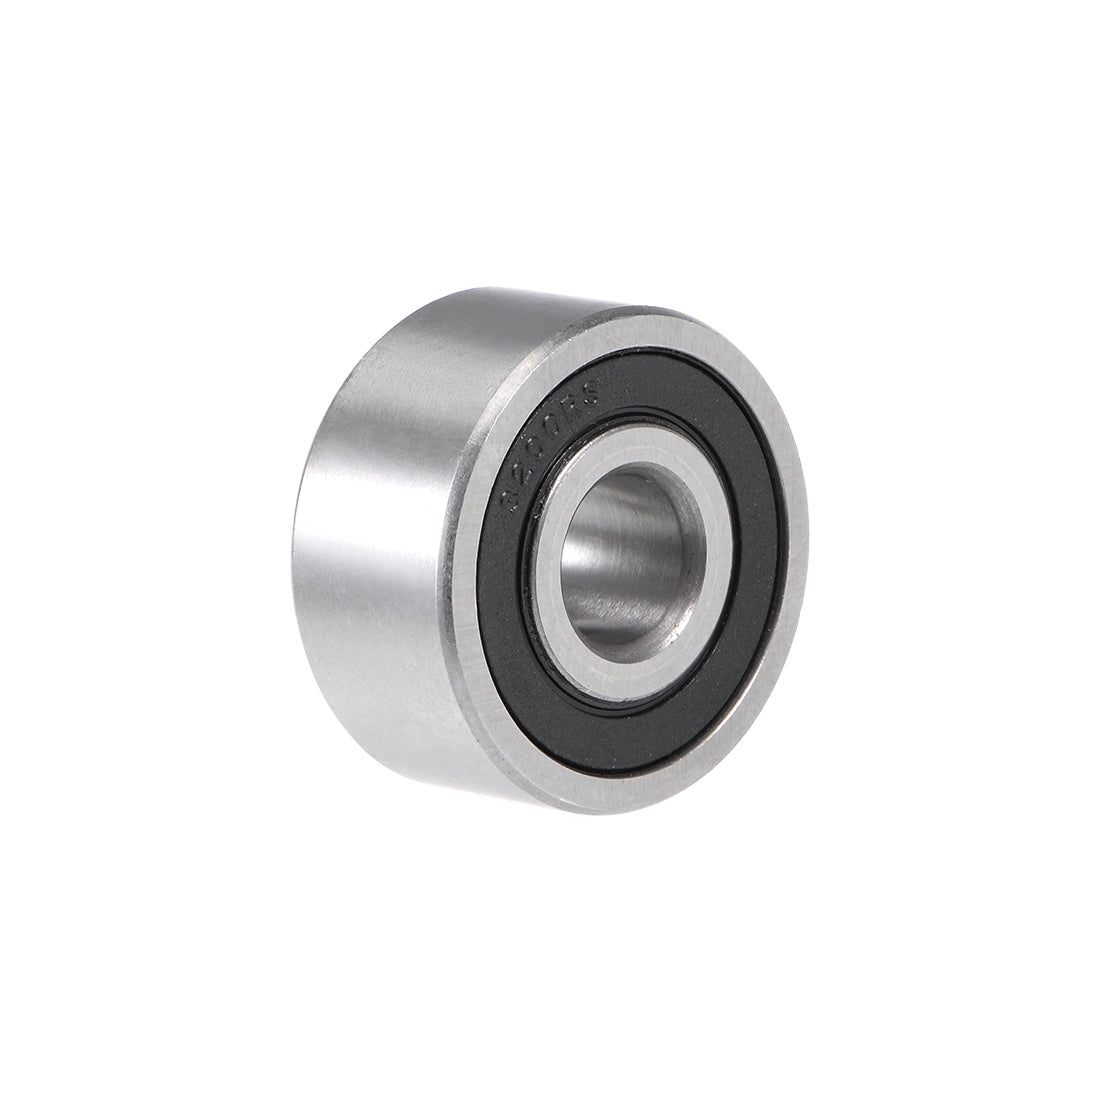 uxcell Uxcell 3200-2RS Angular Contact Ball Bearing 10mmx30mmx14.3mm Sealed Bearings 5200-2RS